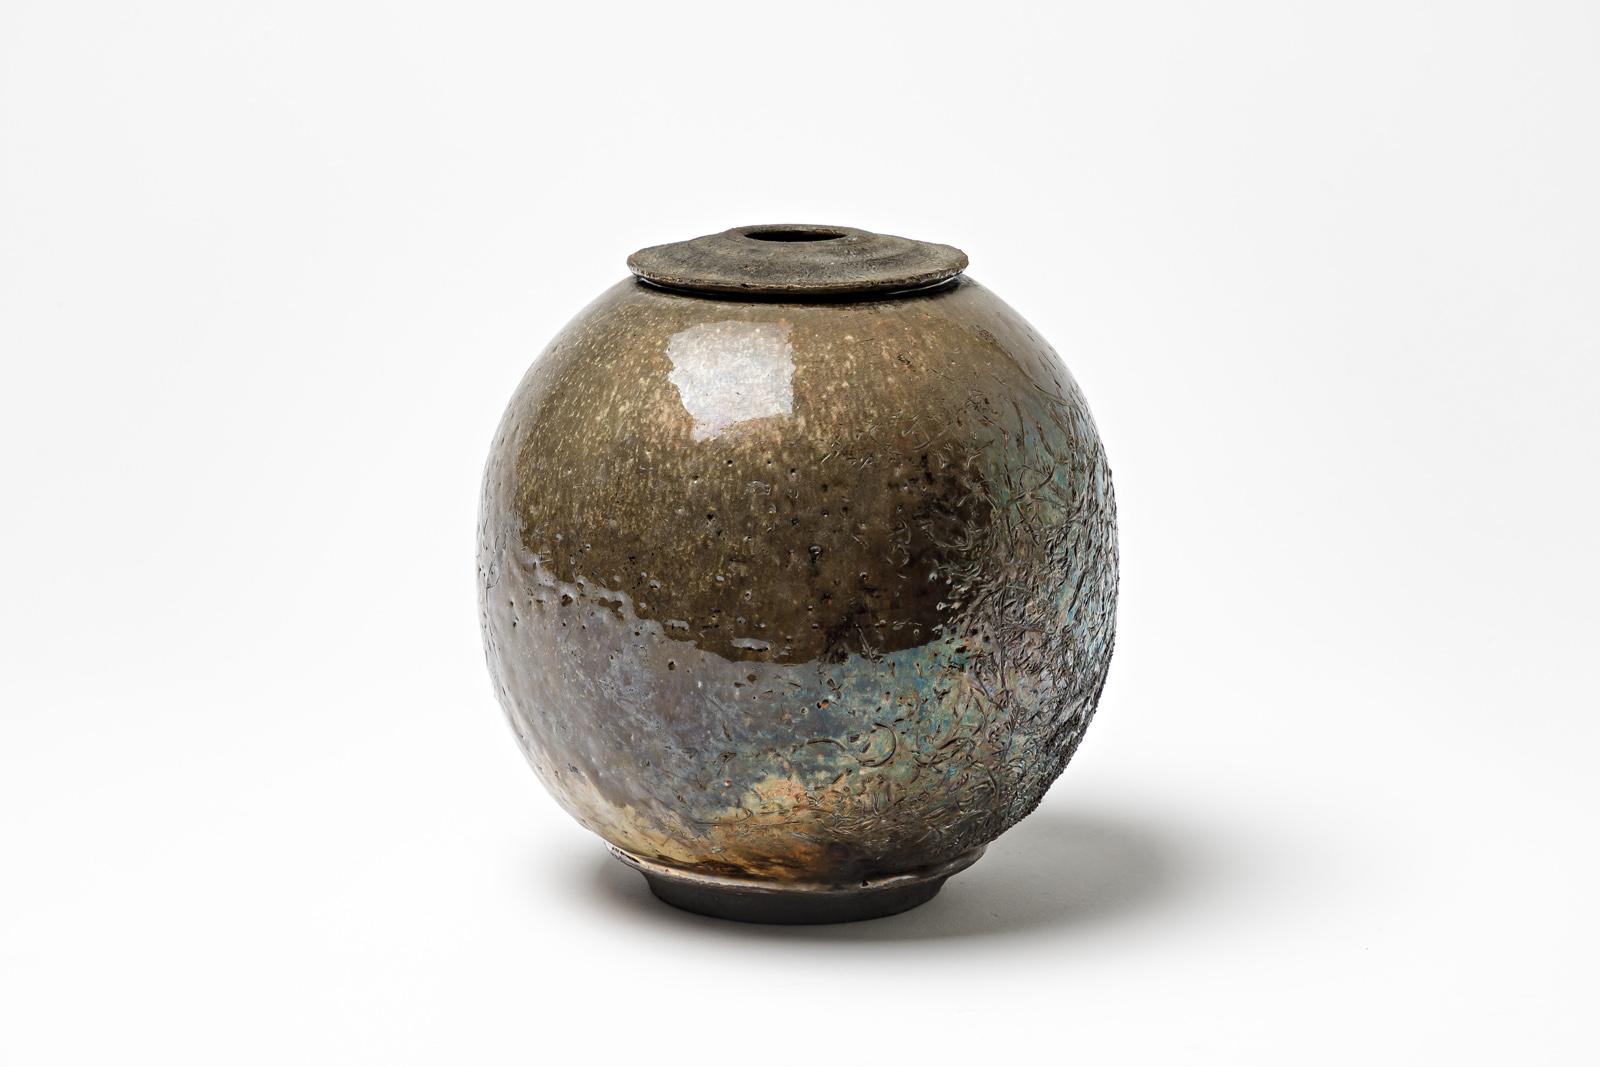 French  Brown glazed stoneware vase with metallic highlights by Gisèle Buthod Garçon. For Sale